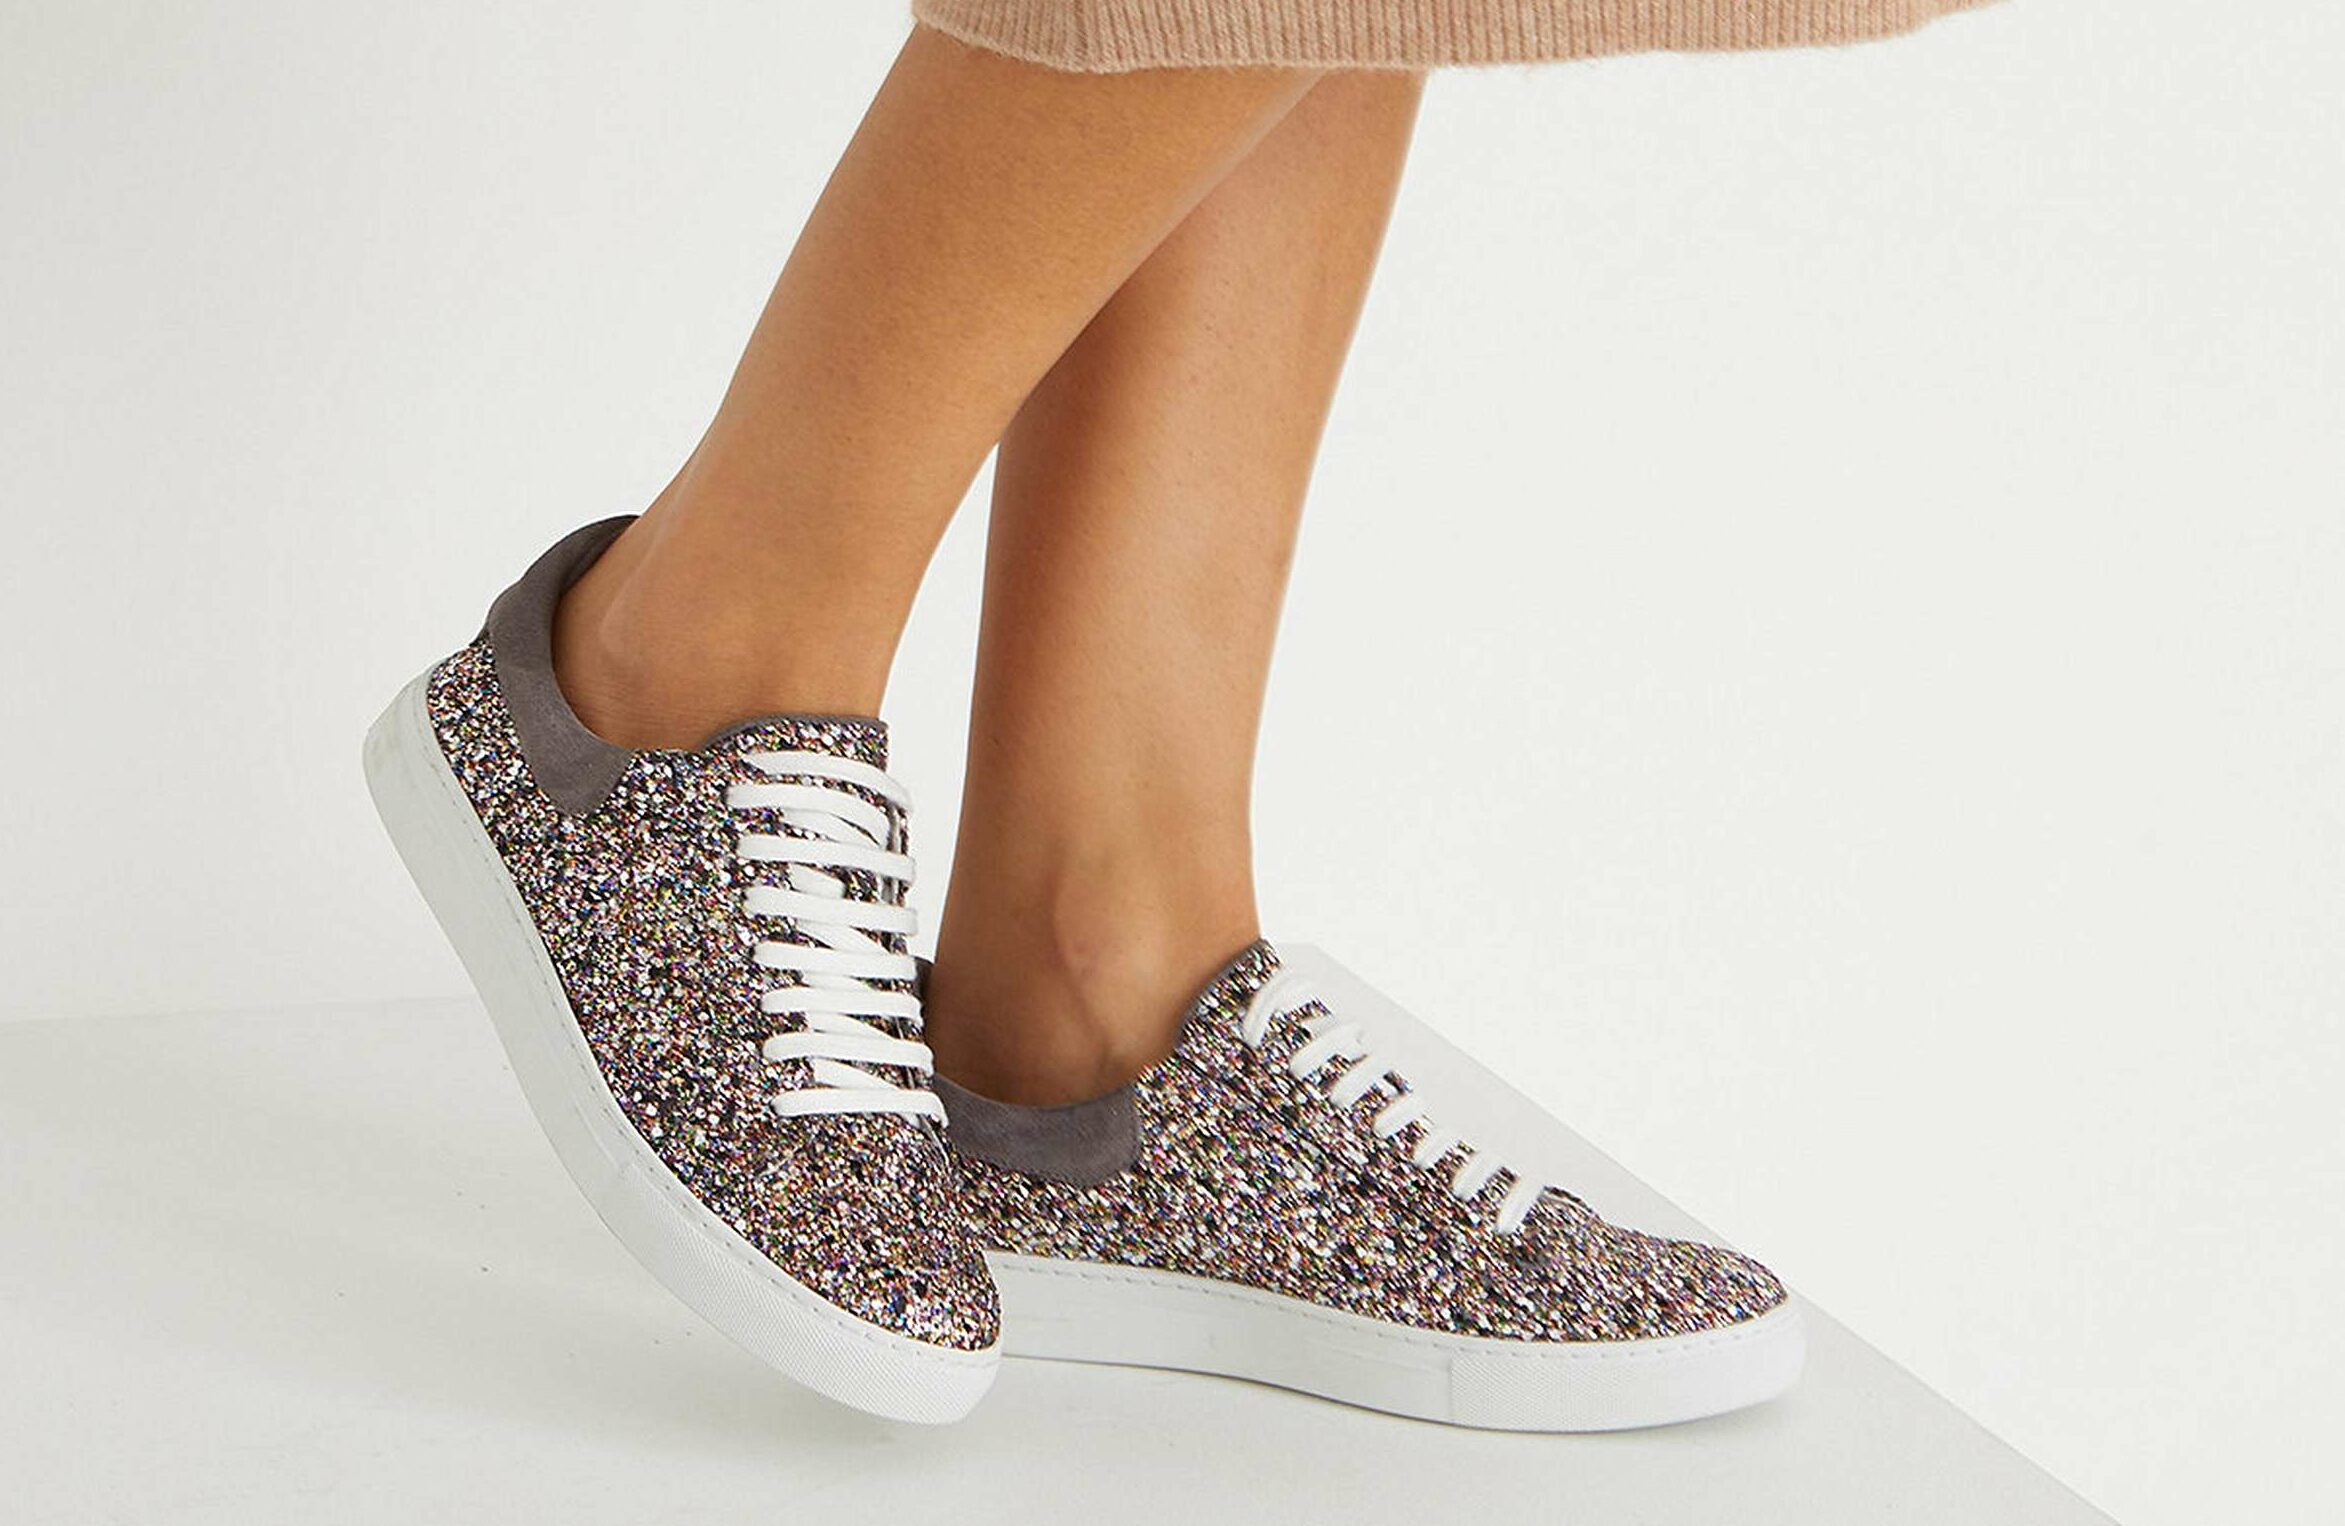 sparkly trainers for women